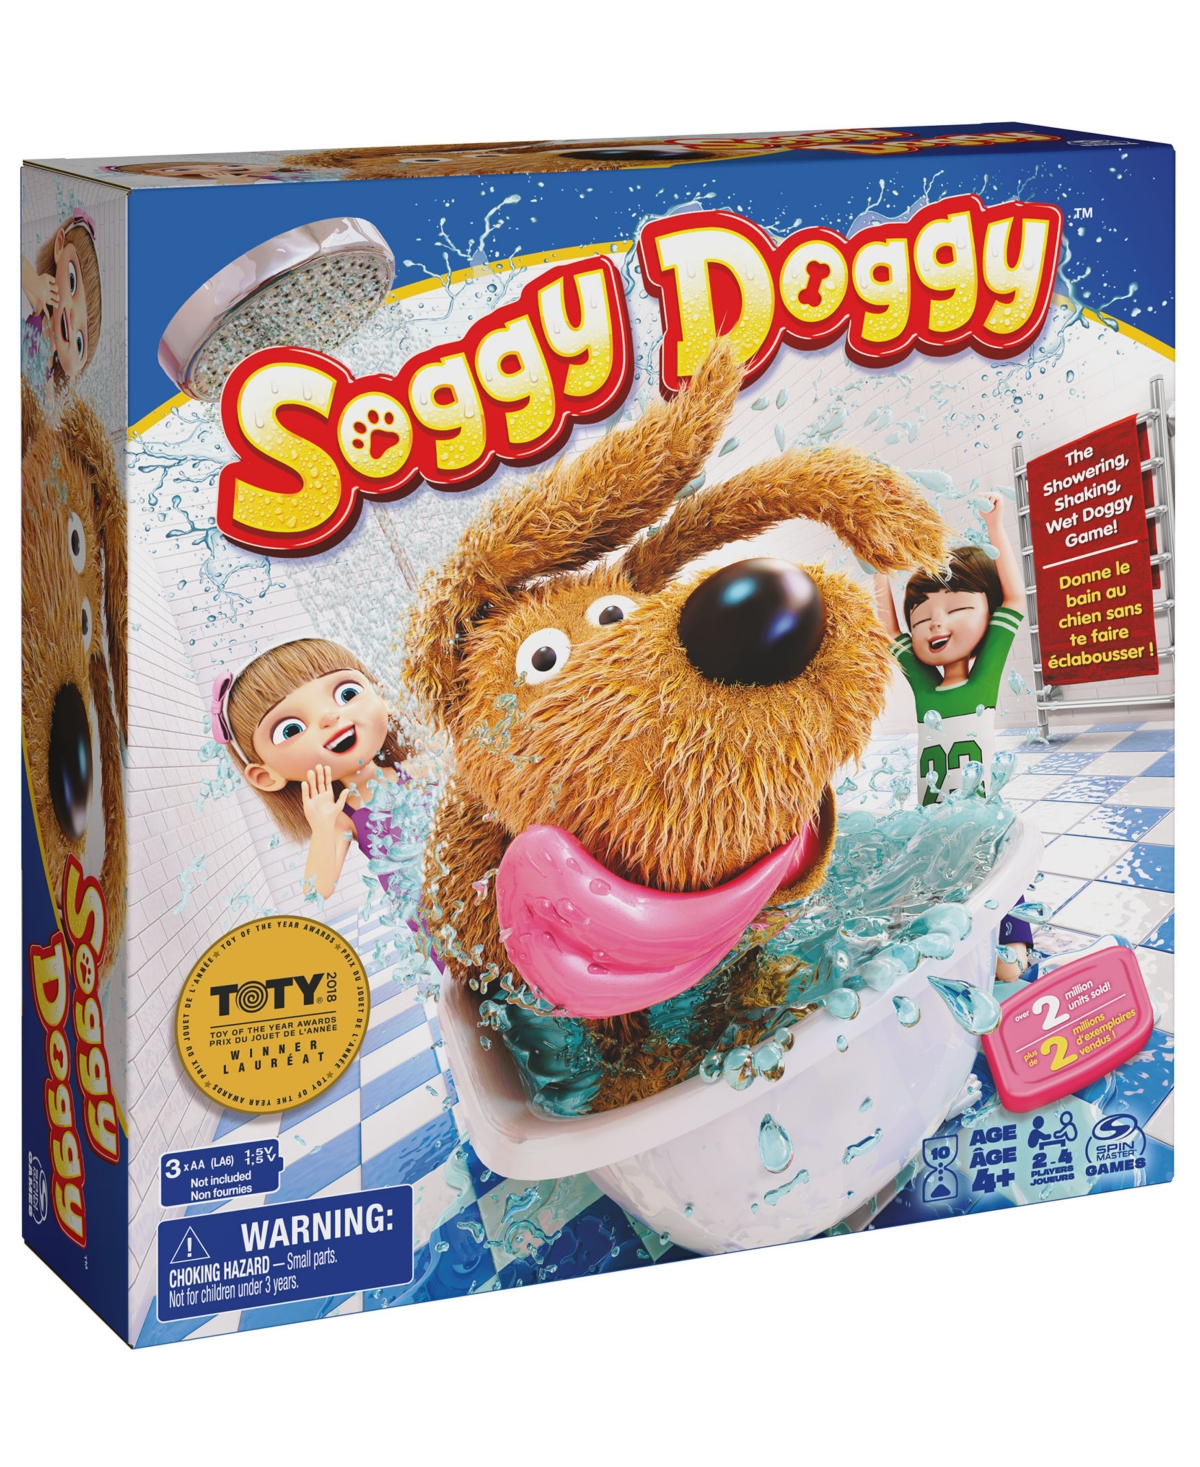 Spin Master Toys & Games Soggy Doggy, The Showering Shaking Wet Dog Award-winning Kids Board Game In Multicolor